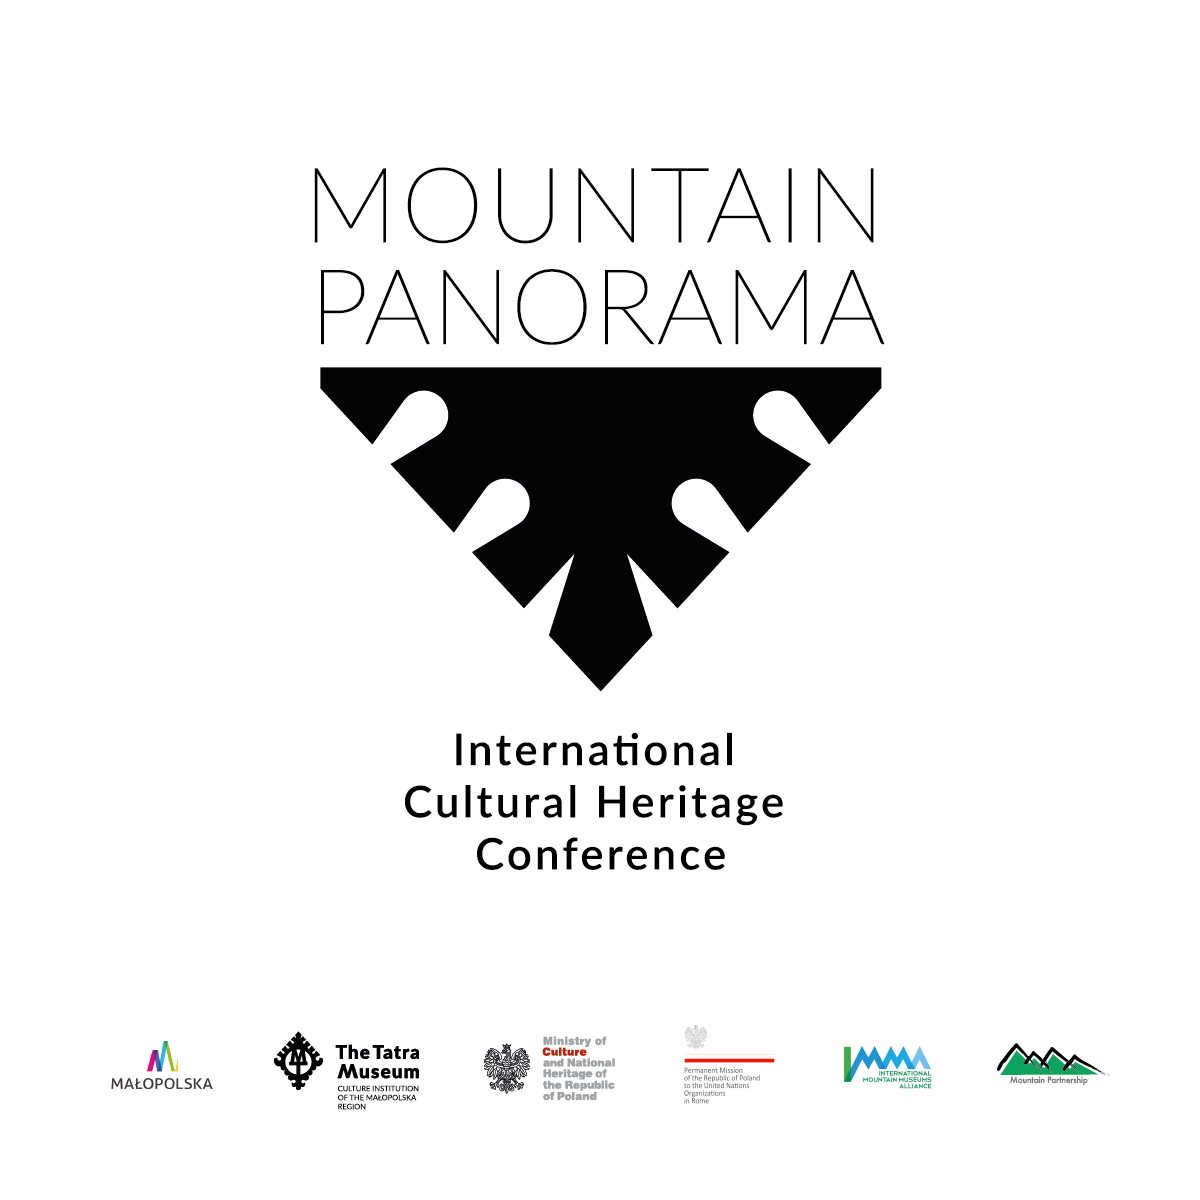 MOUNTAIN PANORAMA – INTERNATIONAL CULTURAL HERITAGE CONFERENCE